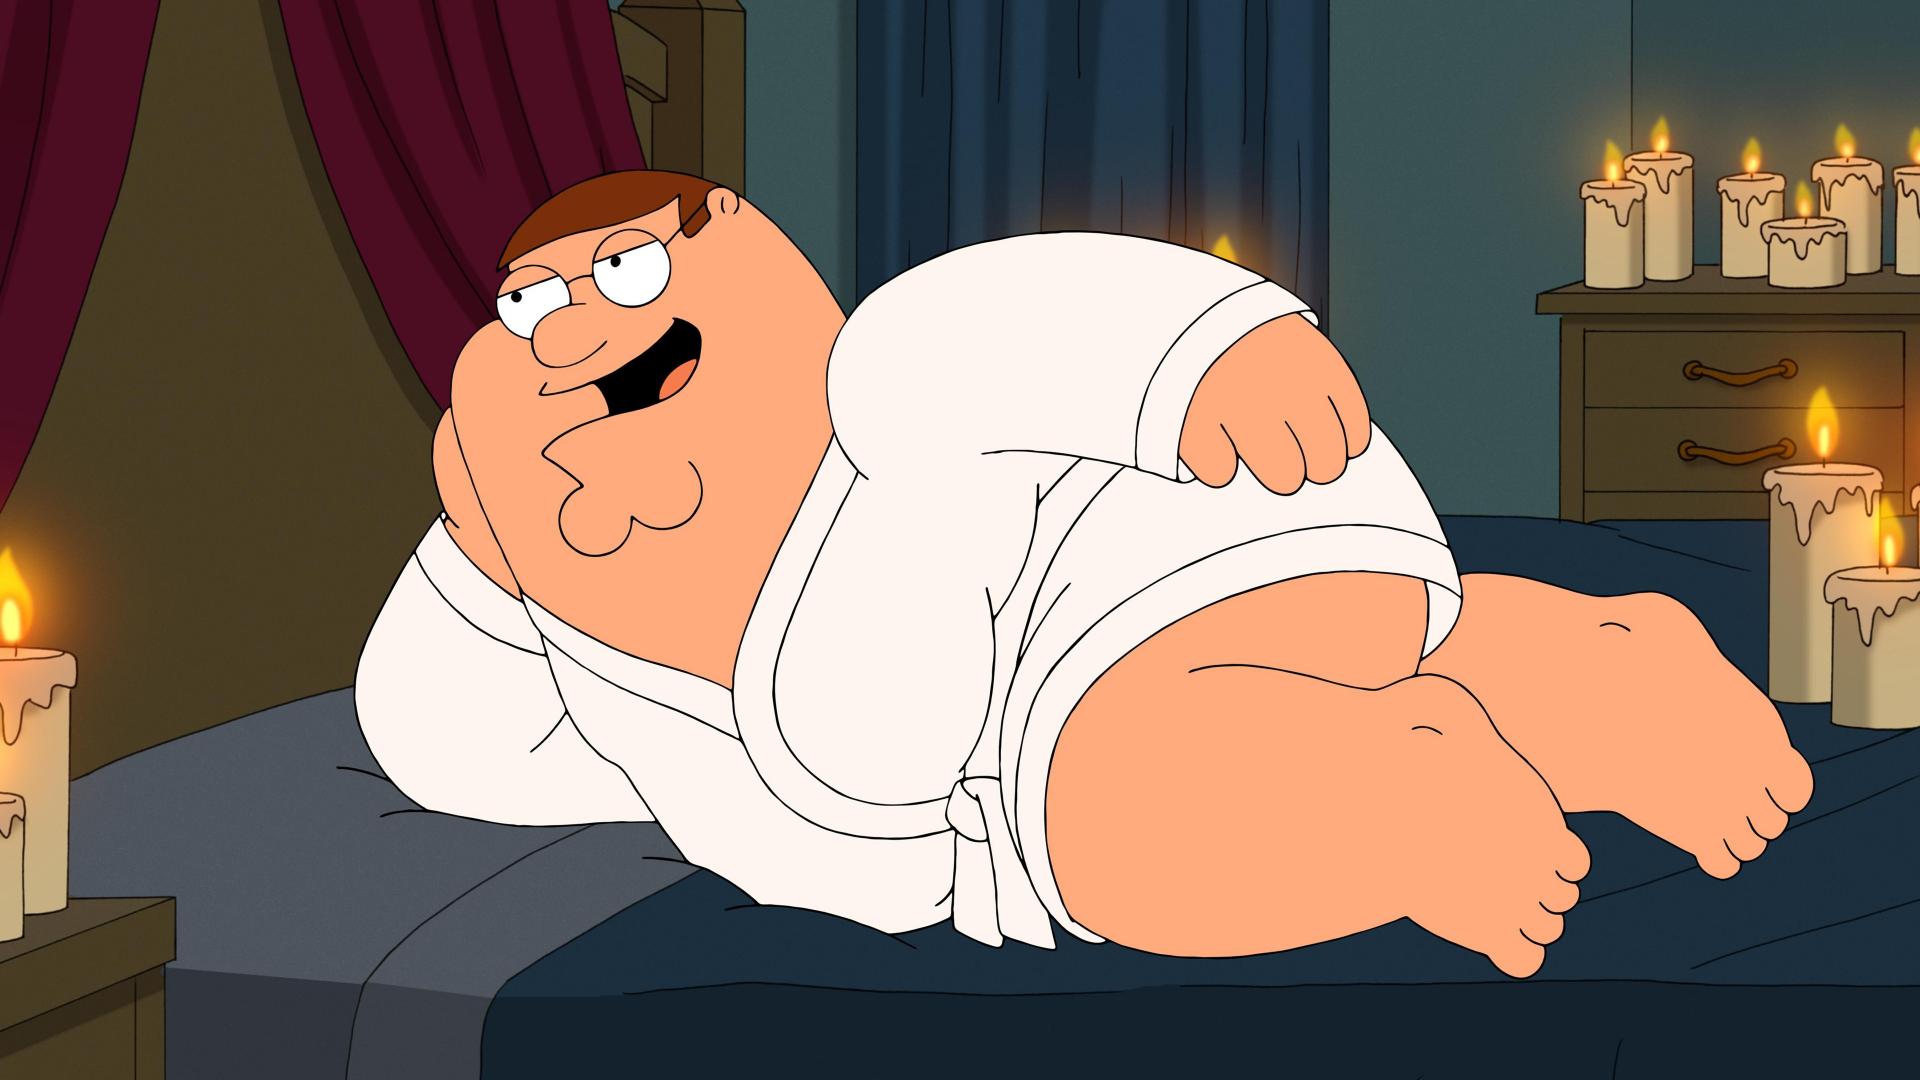 Family guy peter griffin wallpaper HD 1920x1080.